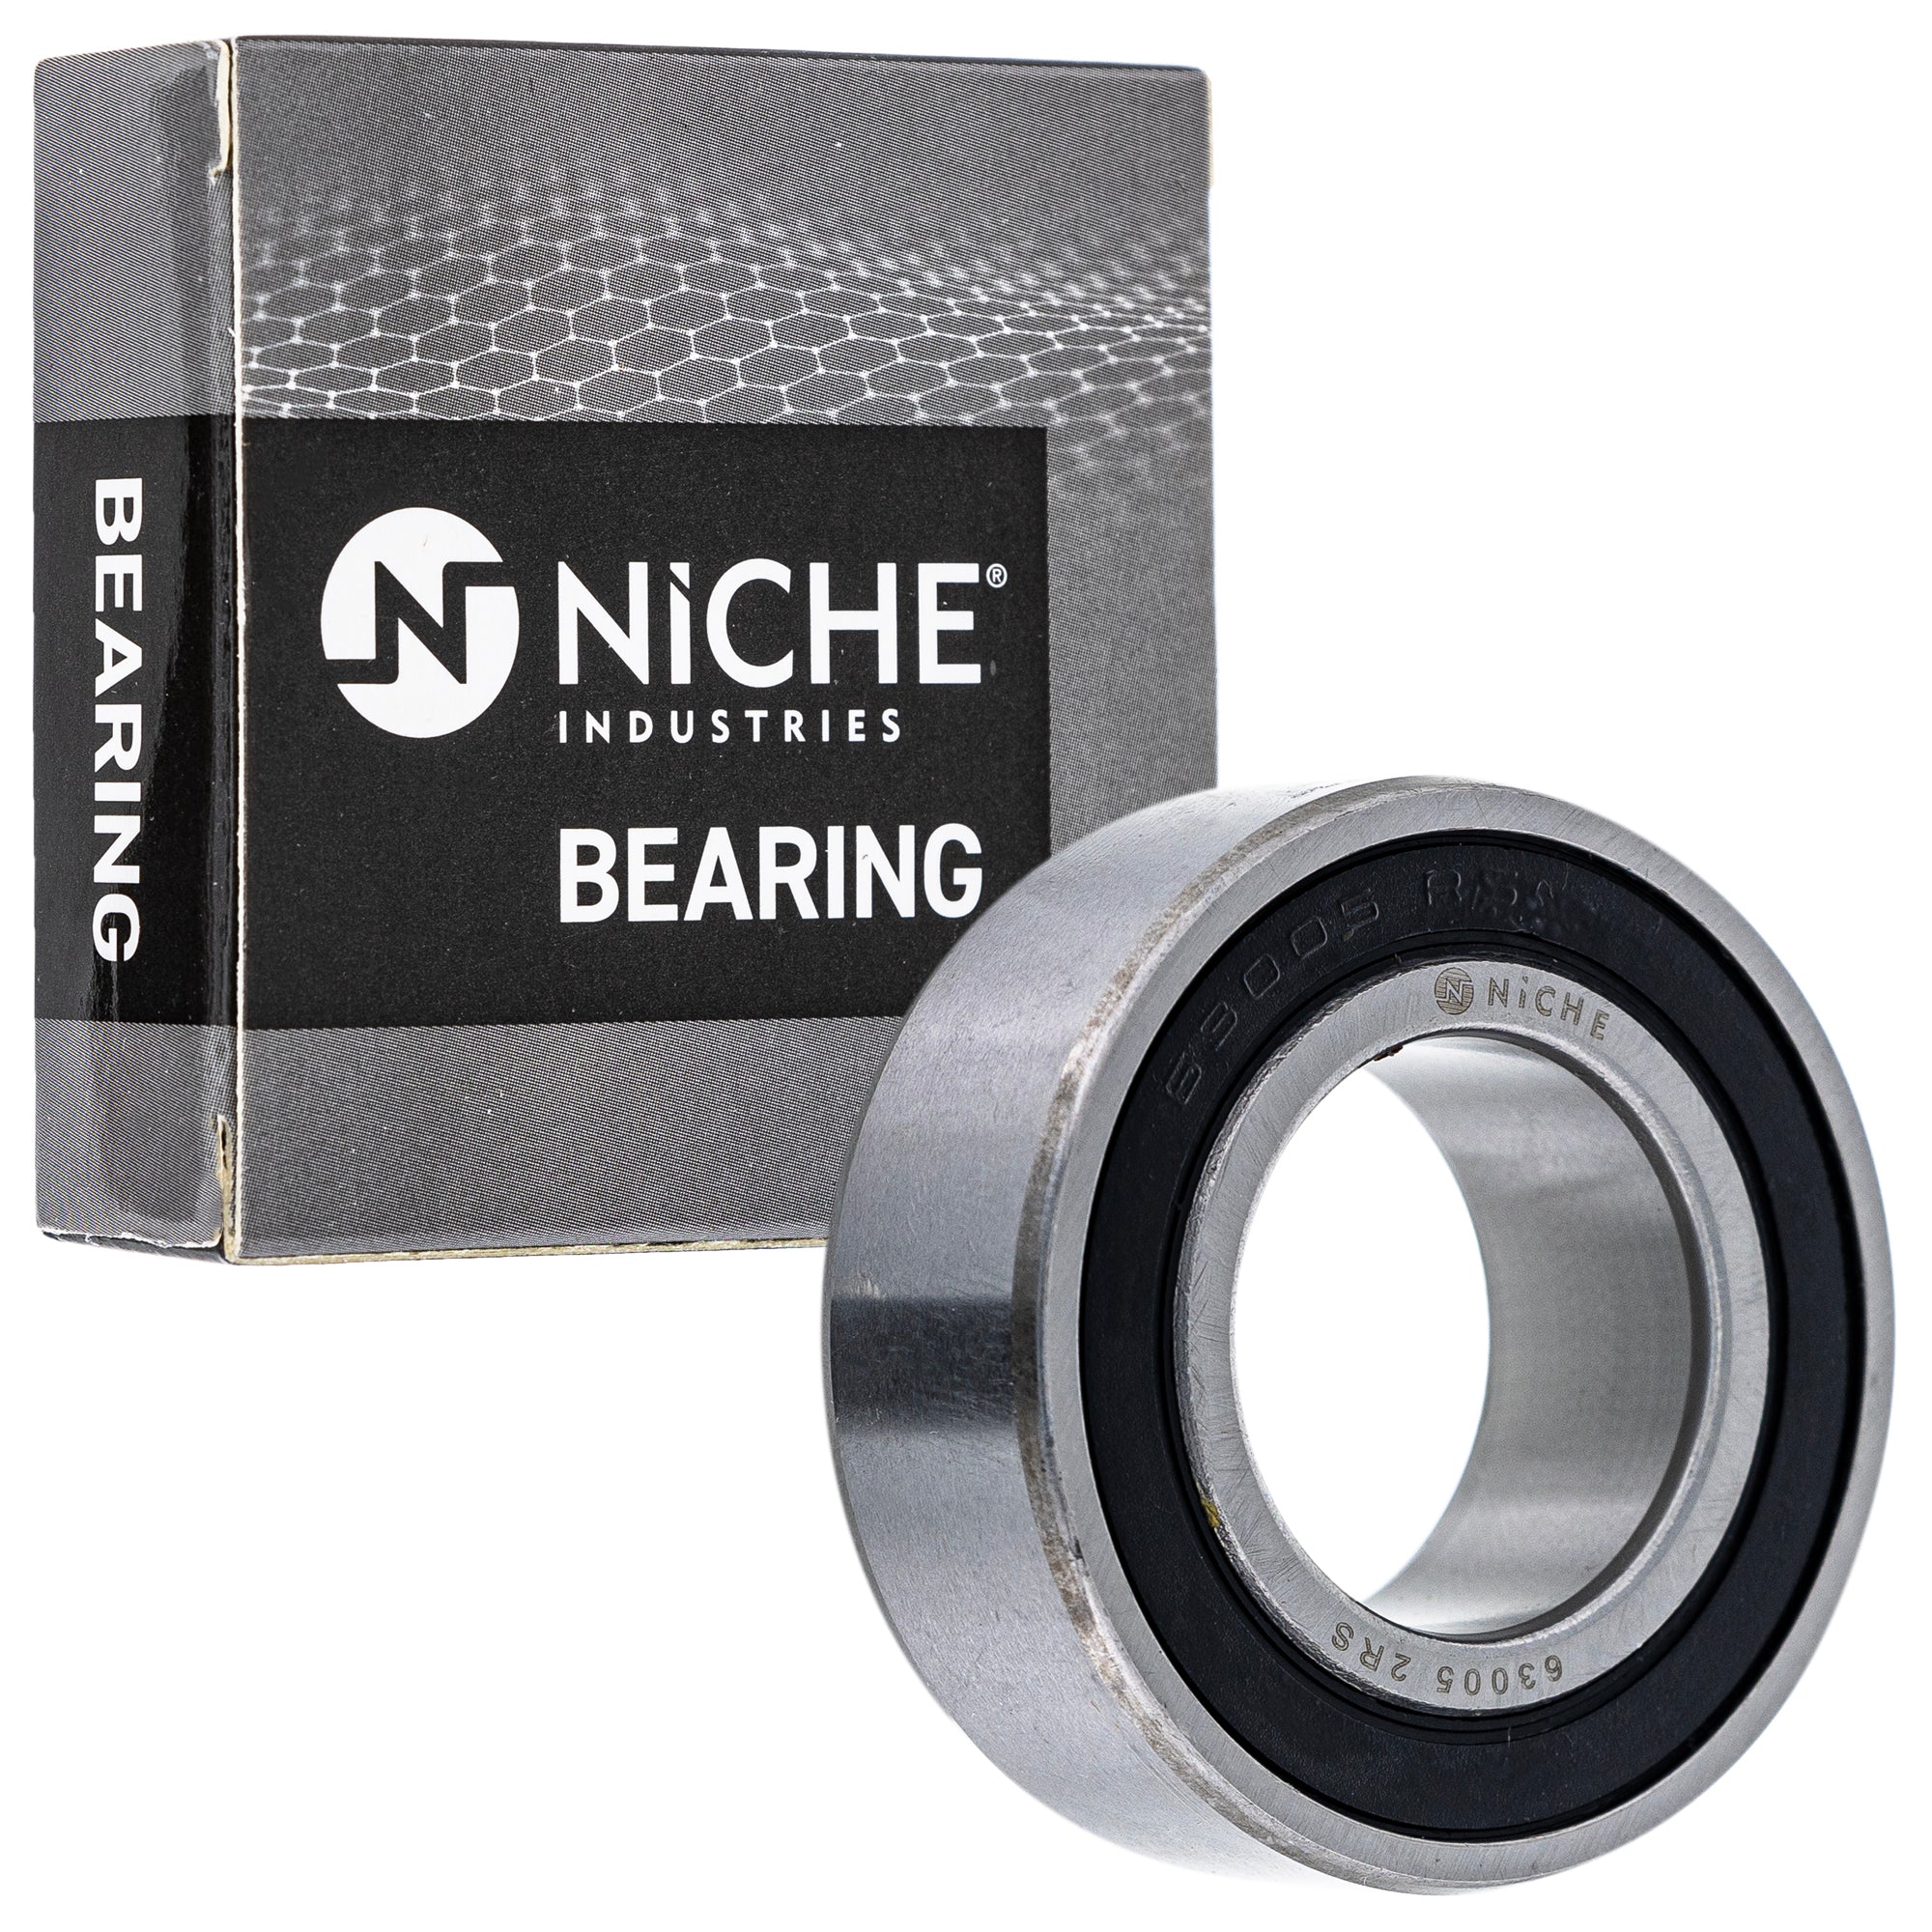 NICHE 519-CBB2335R Bearing 10-Pack for zOTHER K1100LT